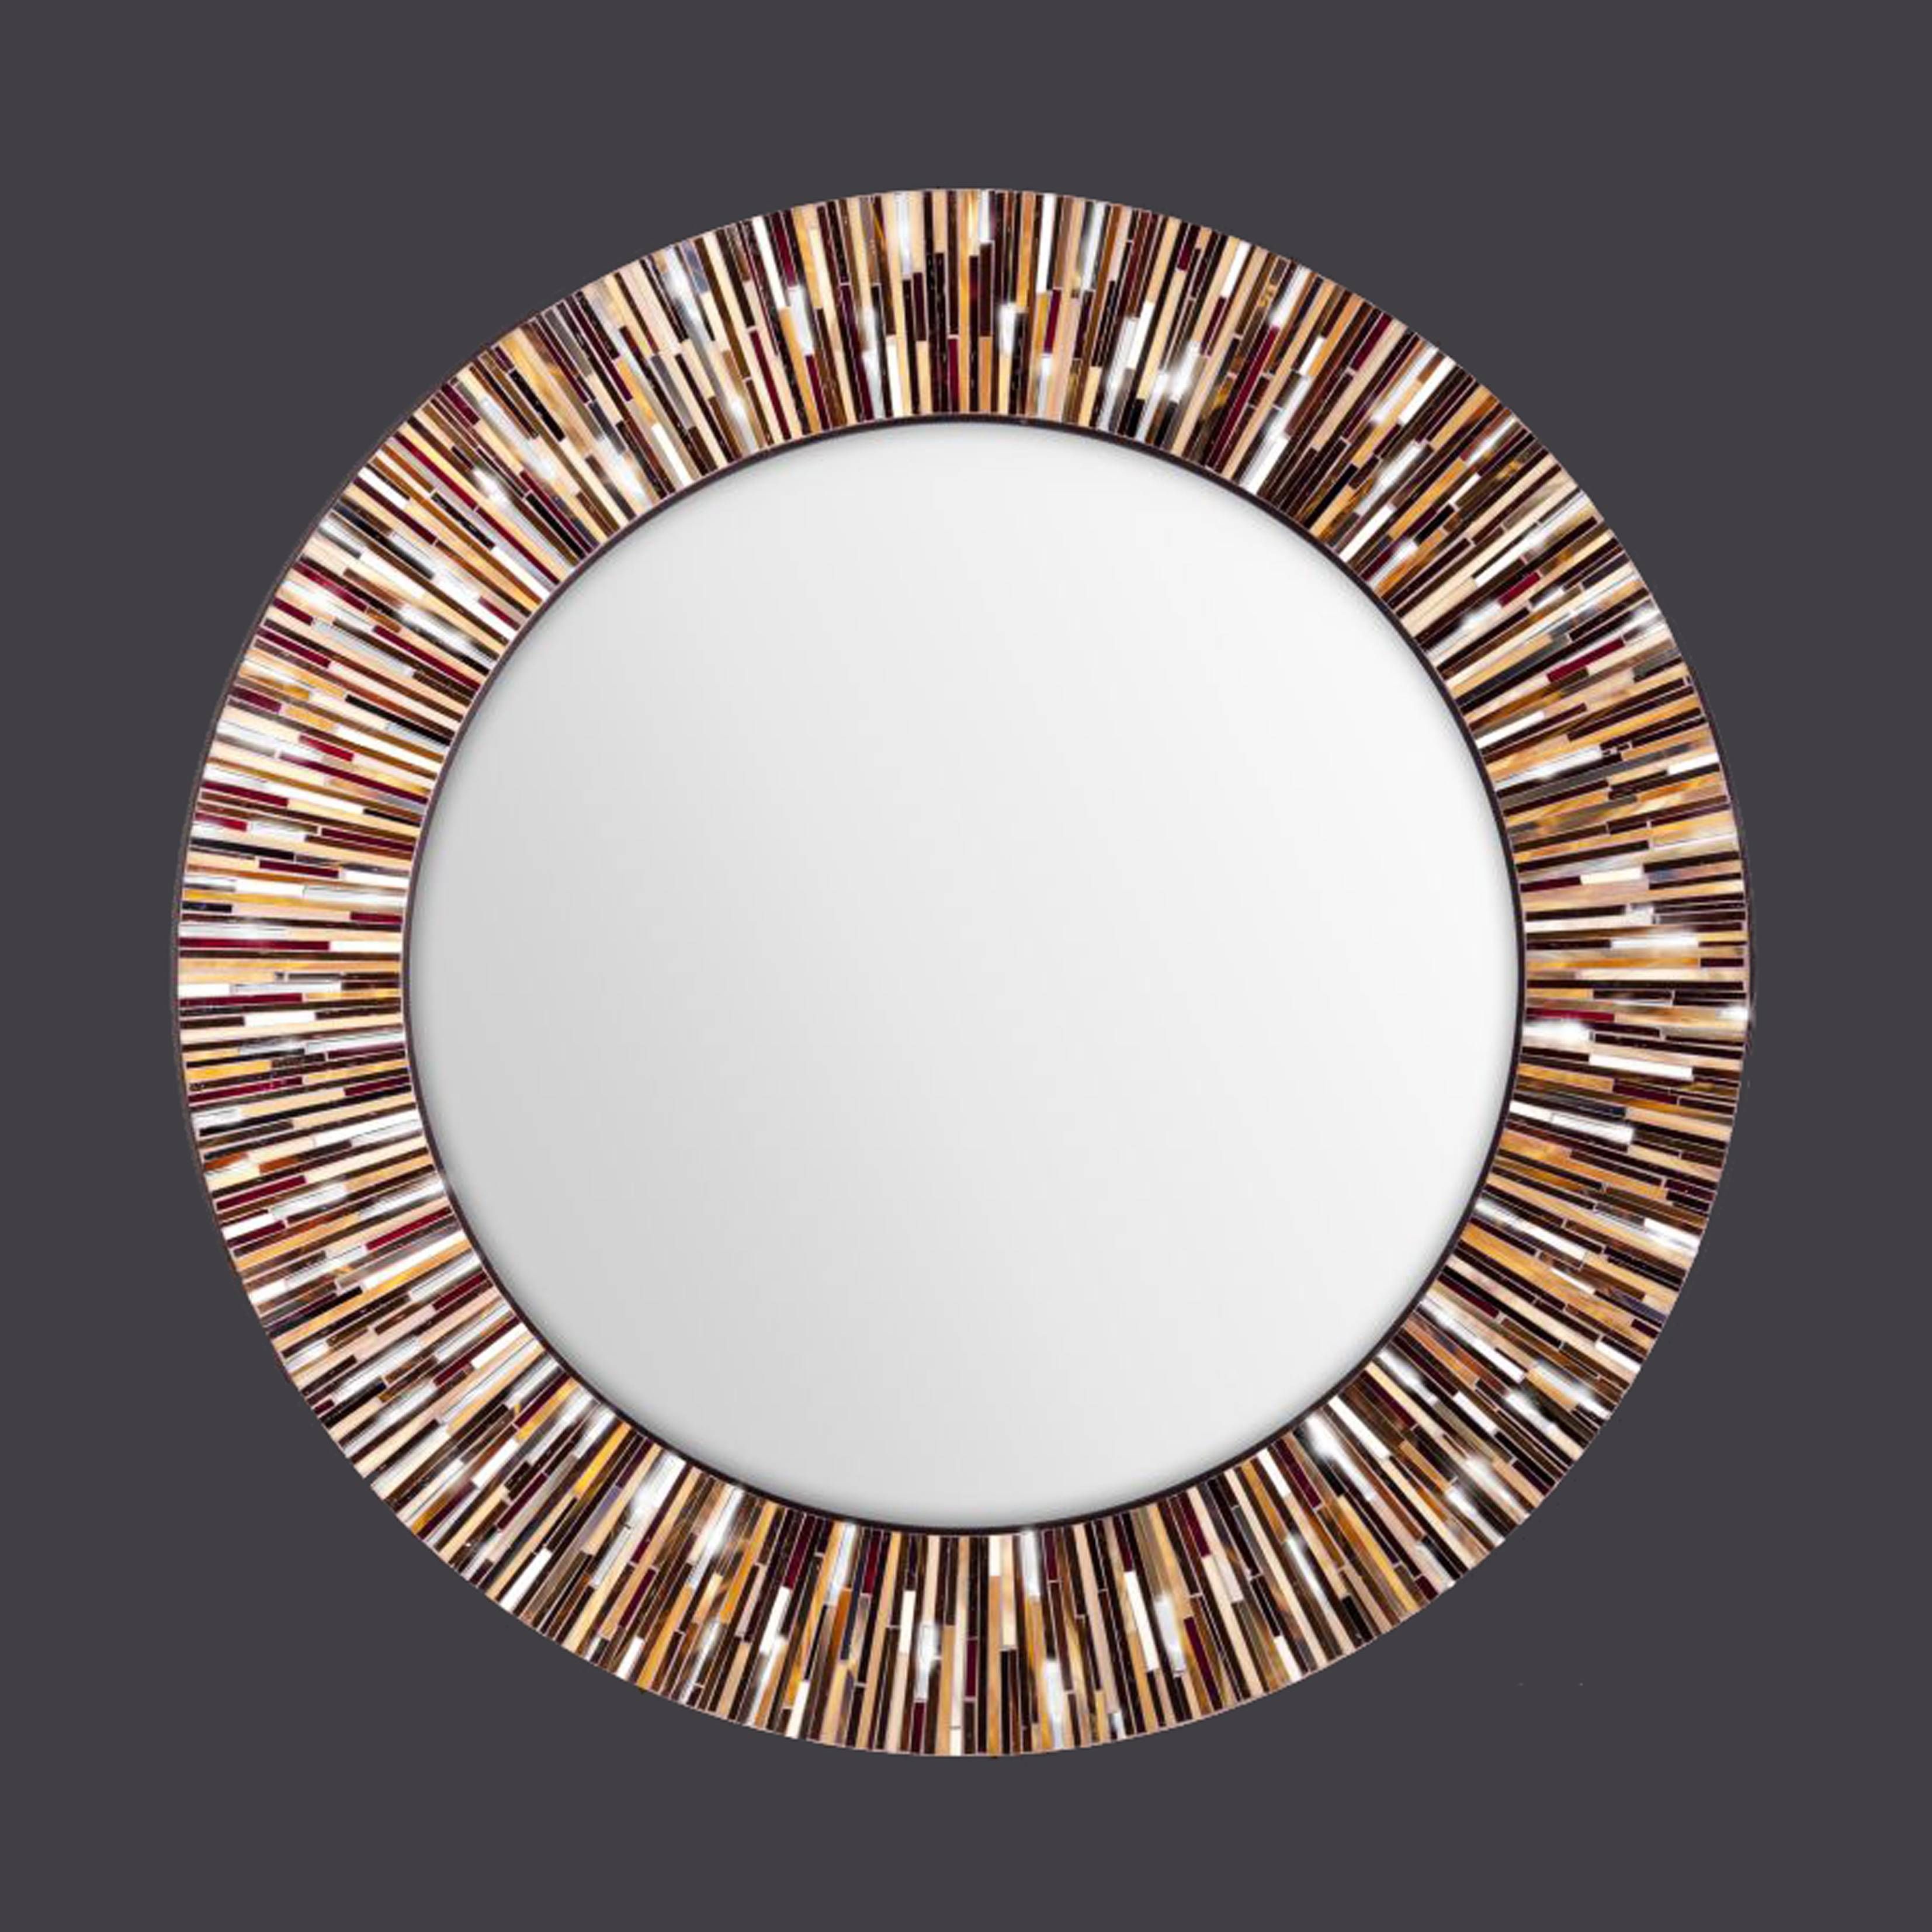 Mosaic Wall Mirrorspiaggi Throughout Funky Round Mirrors (View 6 of 15)